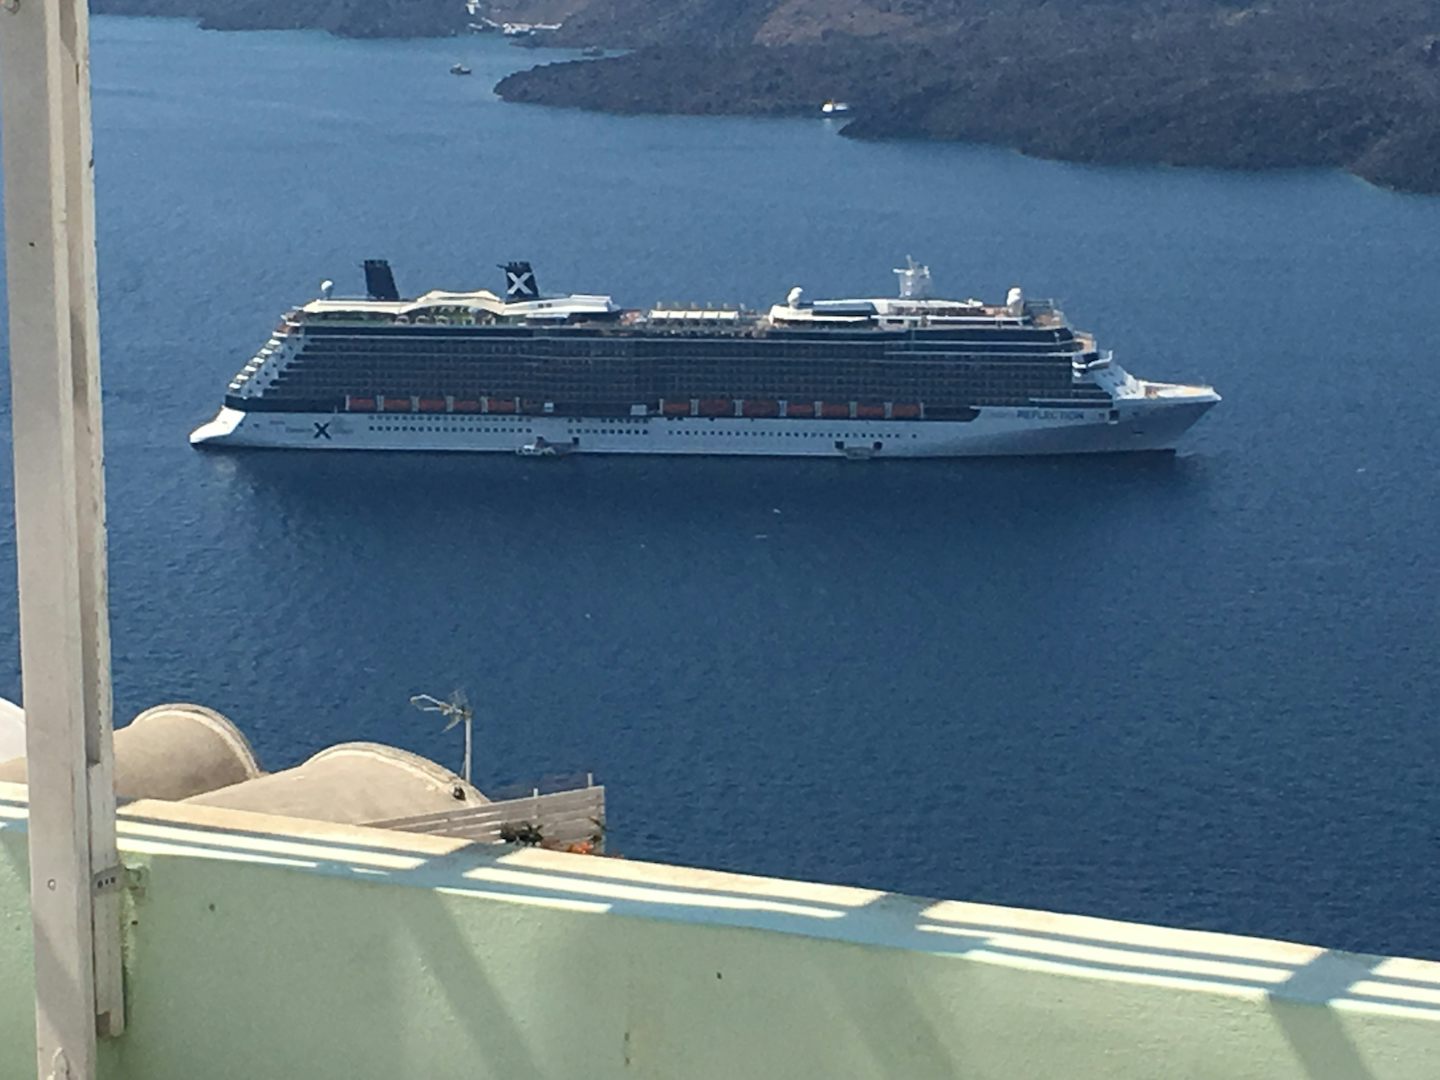 As seen from the top of Santorini